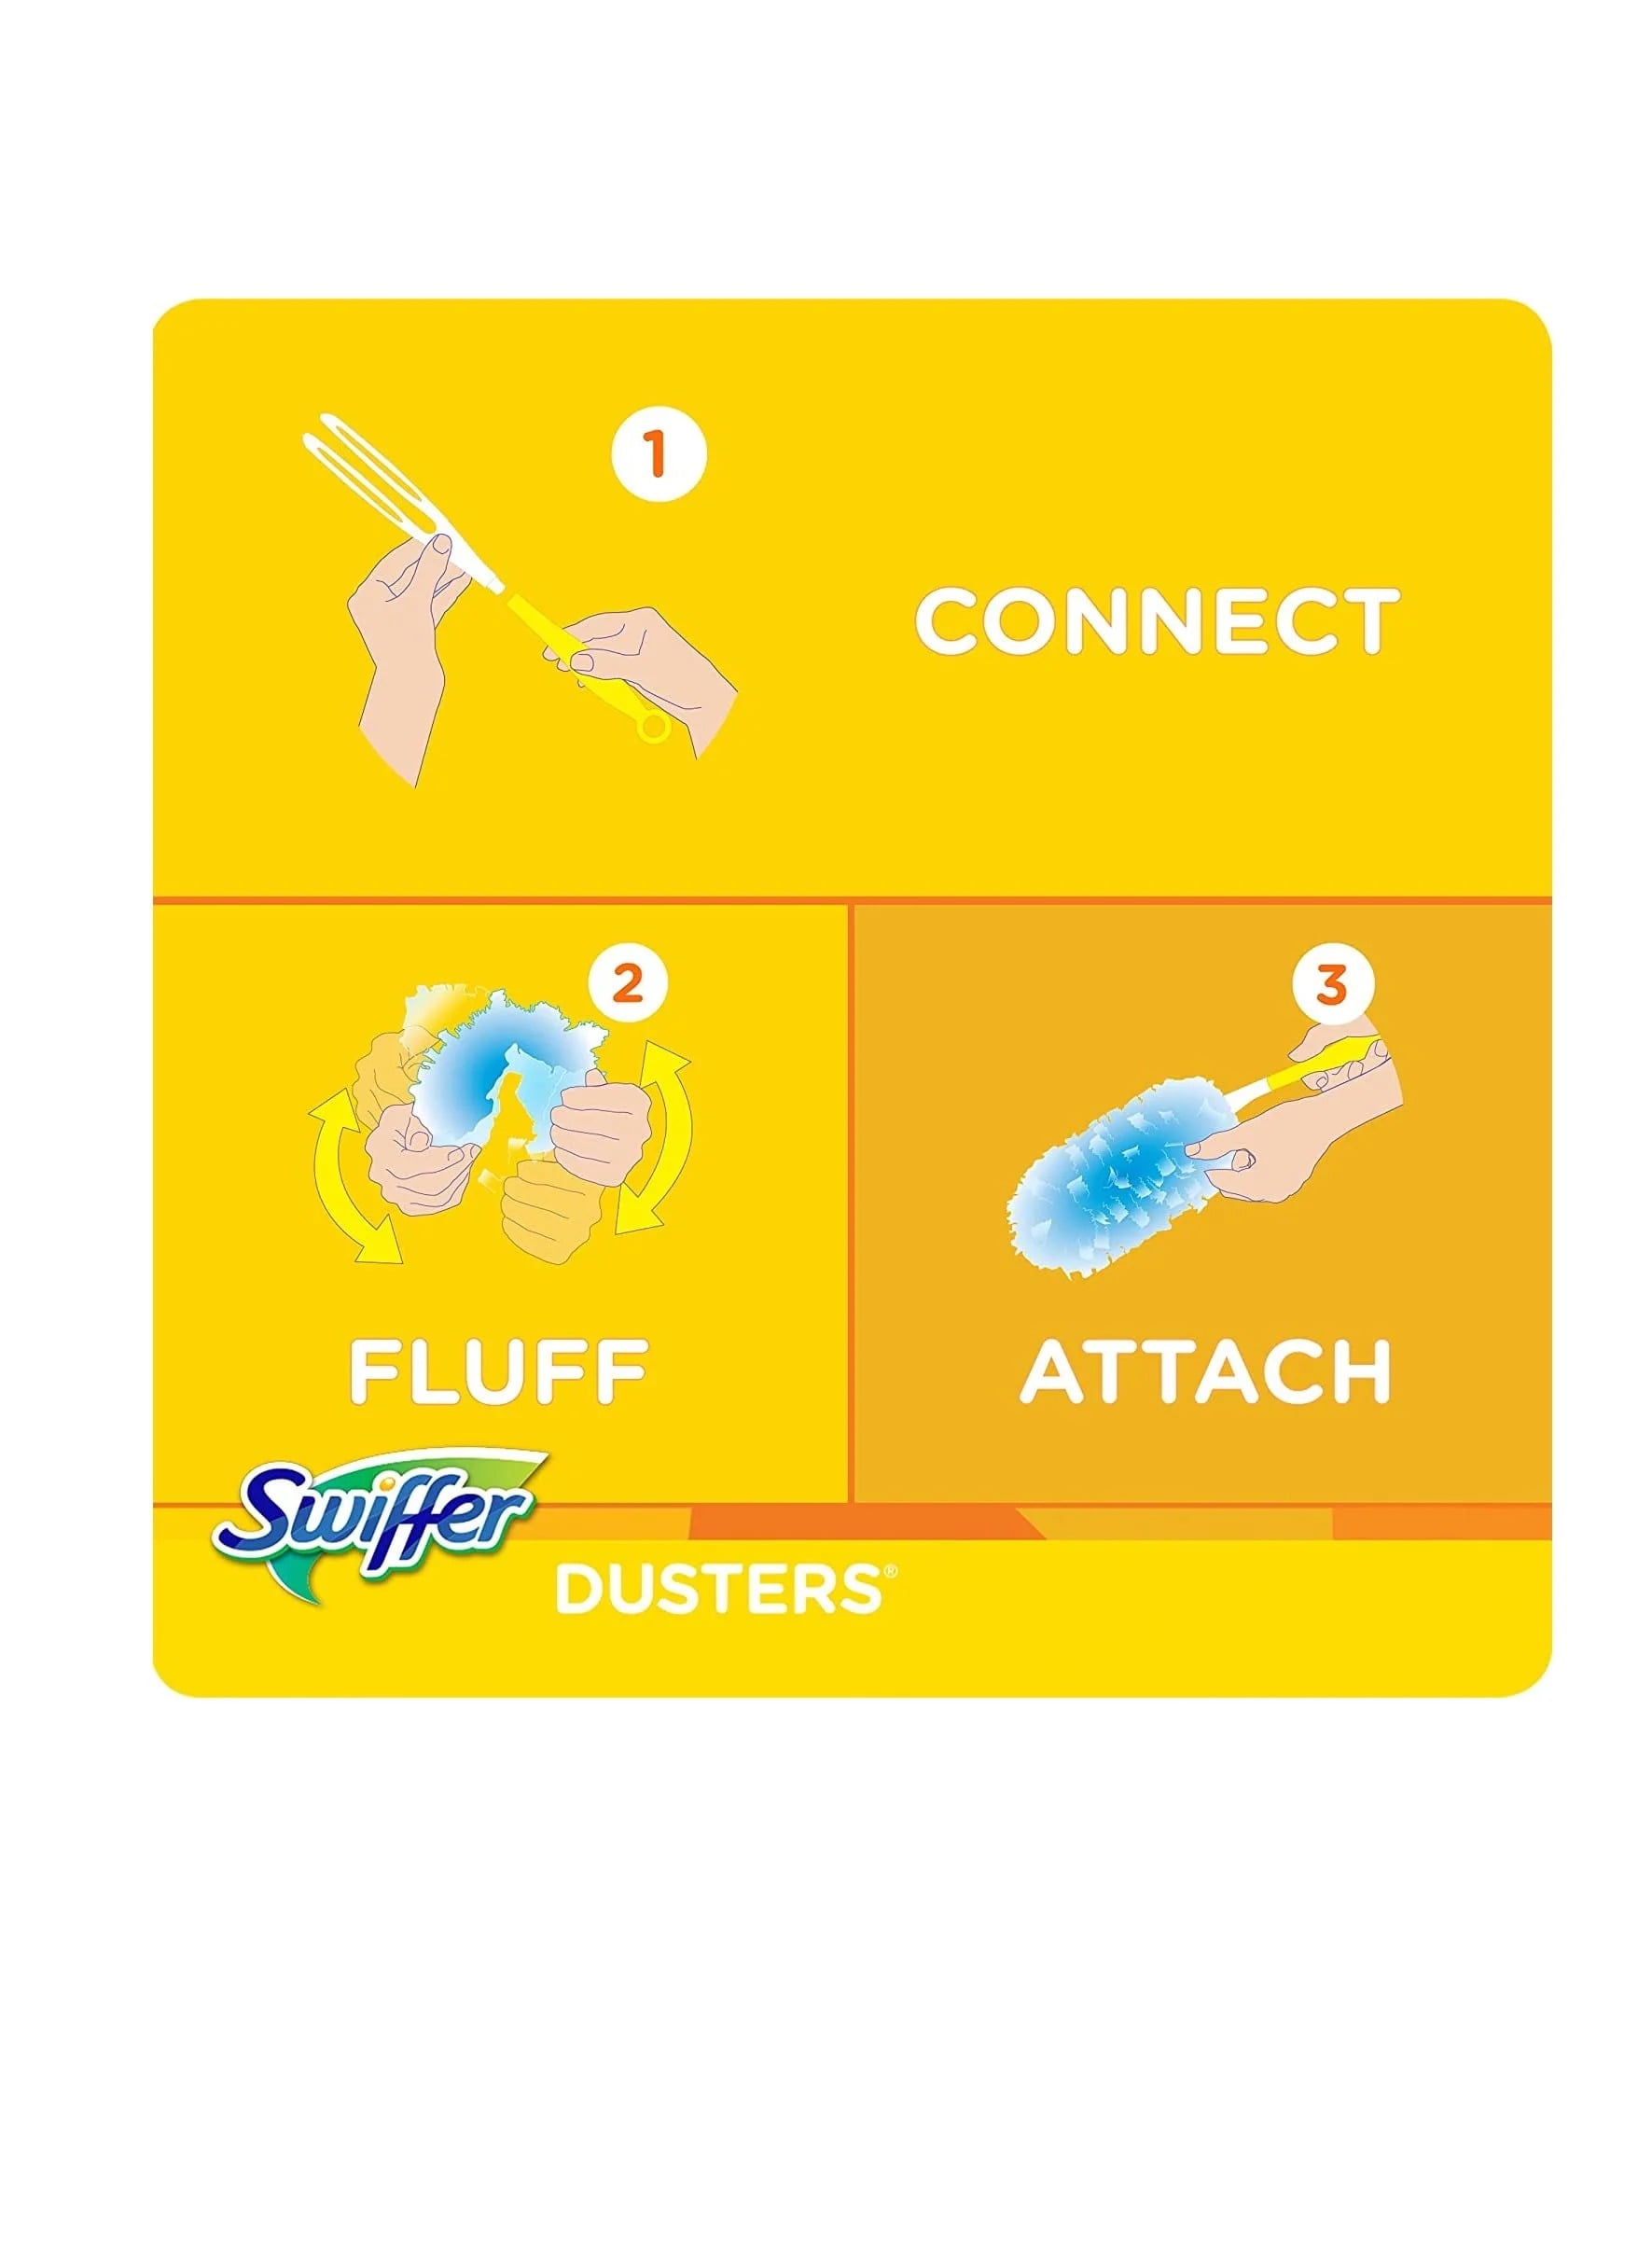 Swiffer Duster Refill + 1 Handle, 28 Count, Blue, Multi-Color